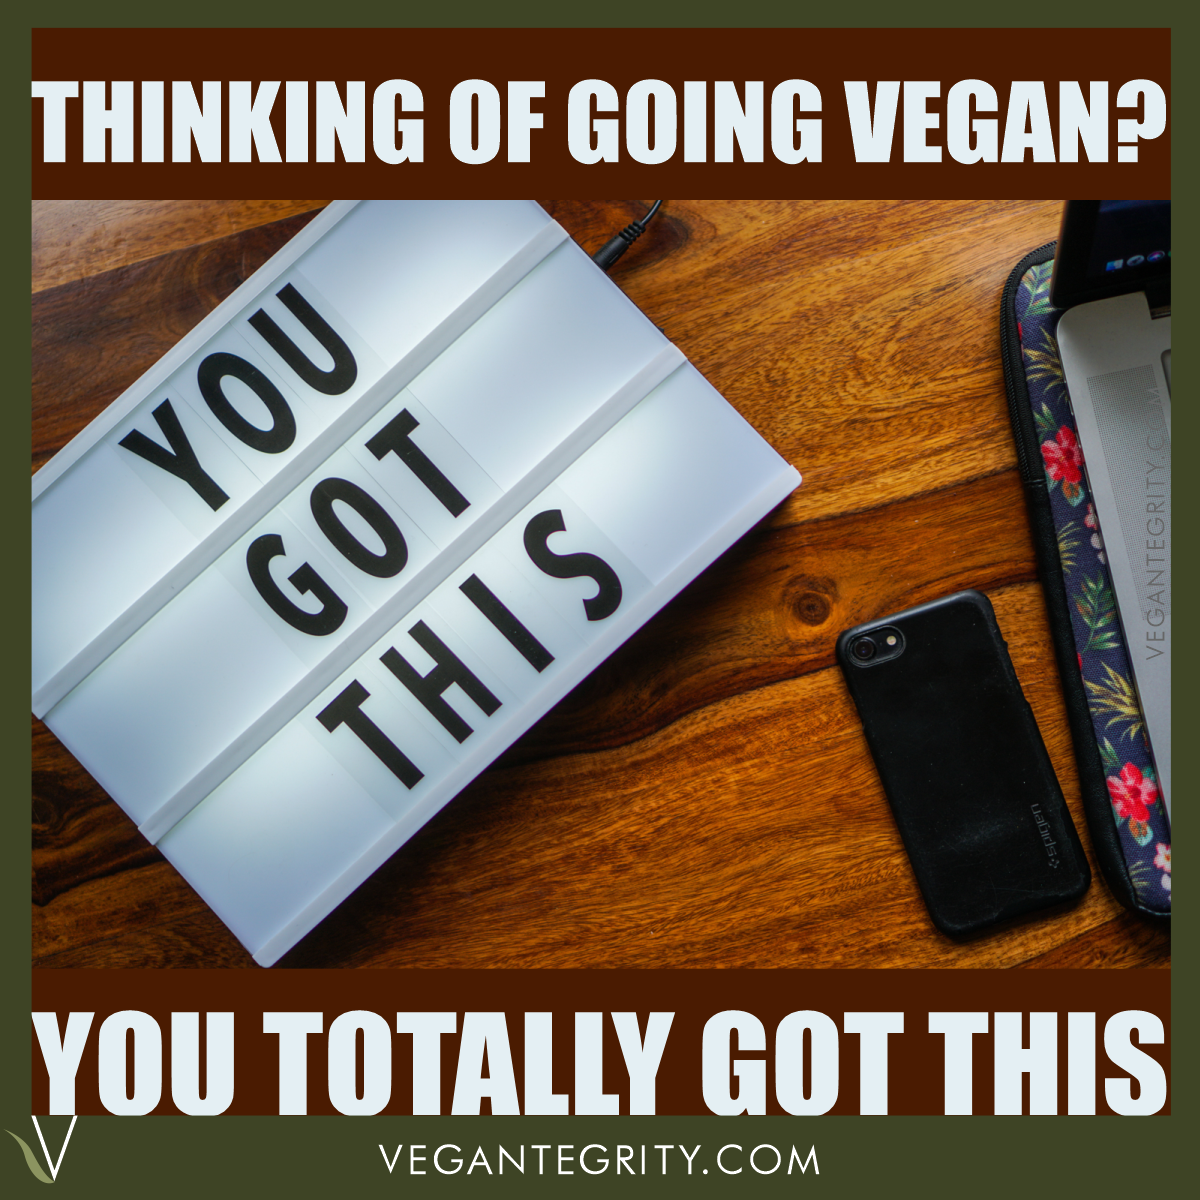 Thinking of going vegan? You got this. White sign with black letters inserted that spell out YOU GOT THIS on wooden tabletop next to smart phone and side of laptop computer